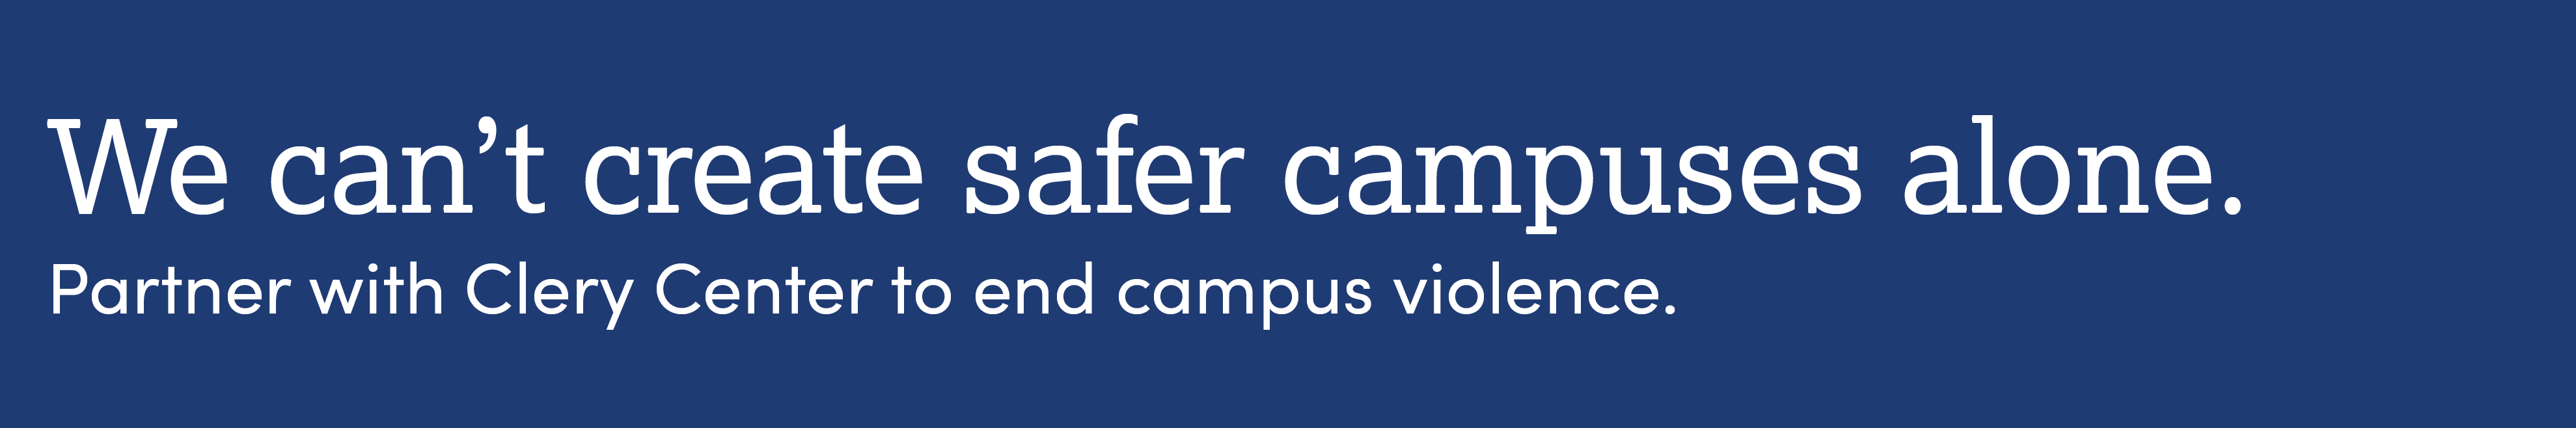 White text on a blue background: We can't create safer campuses alone. Partner with Clery Center to end campus violence.